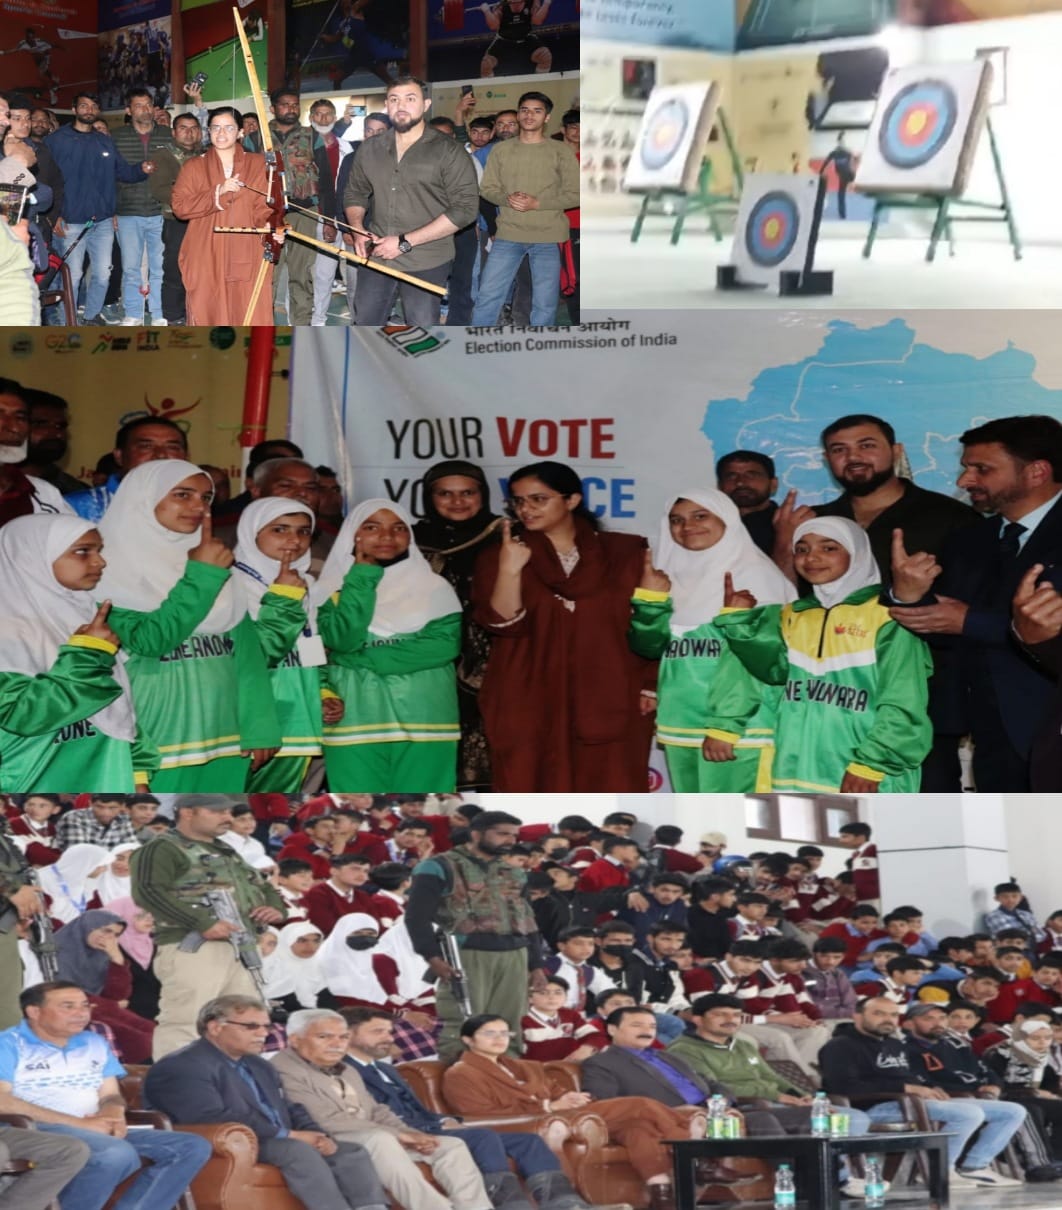 Archery camp for first-time voters at Handwara